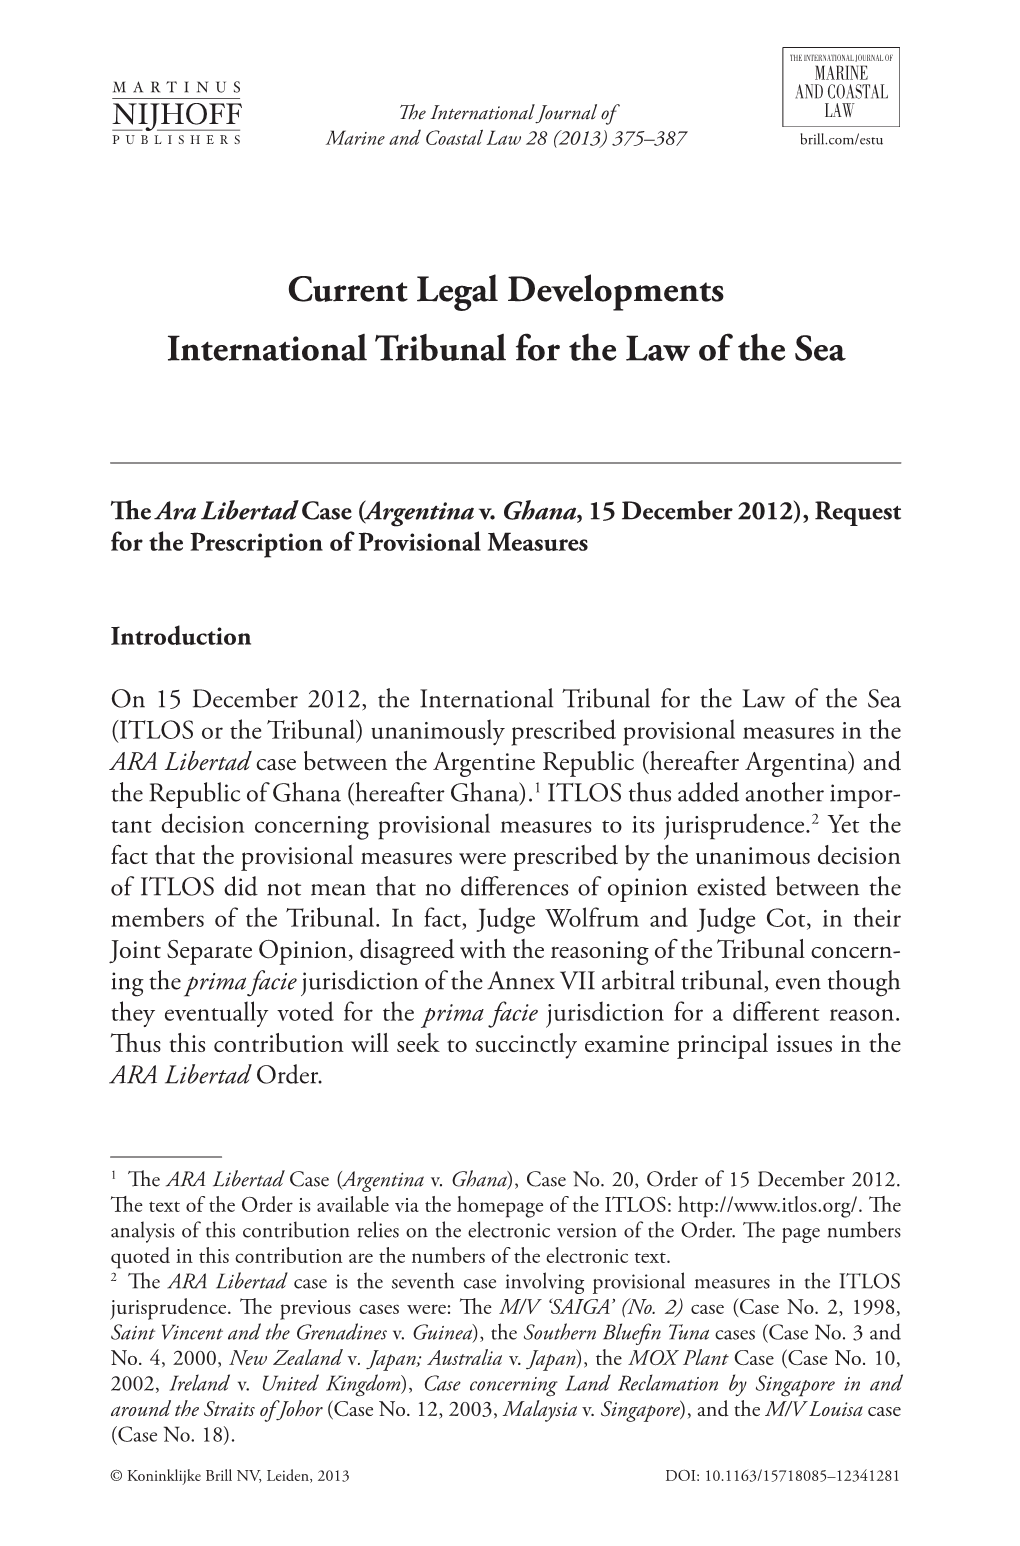 Current Legal Developments International Tribunal for the Law of the Sea